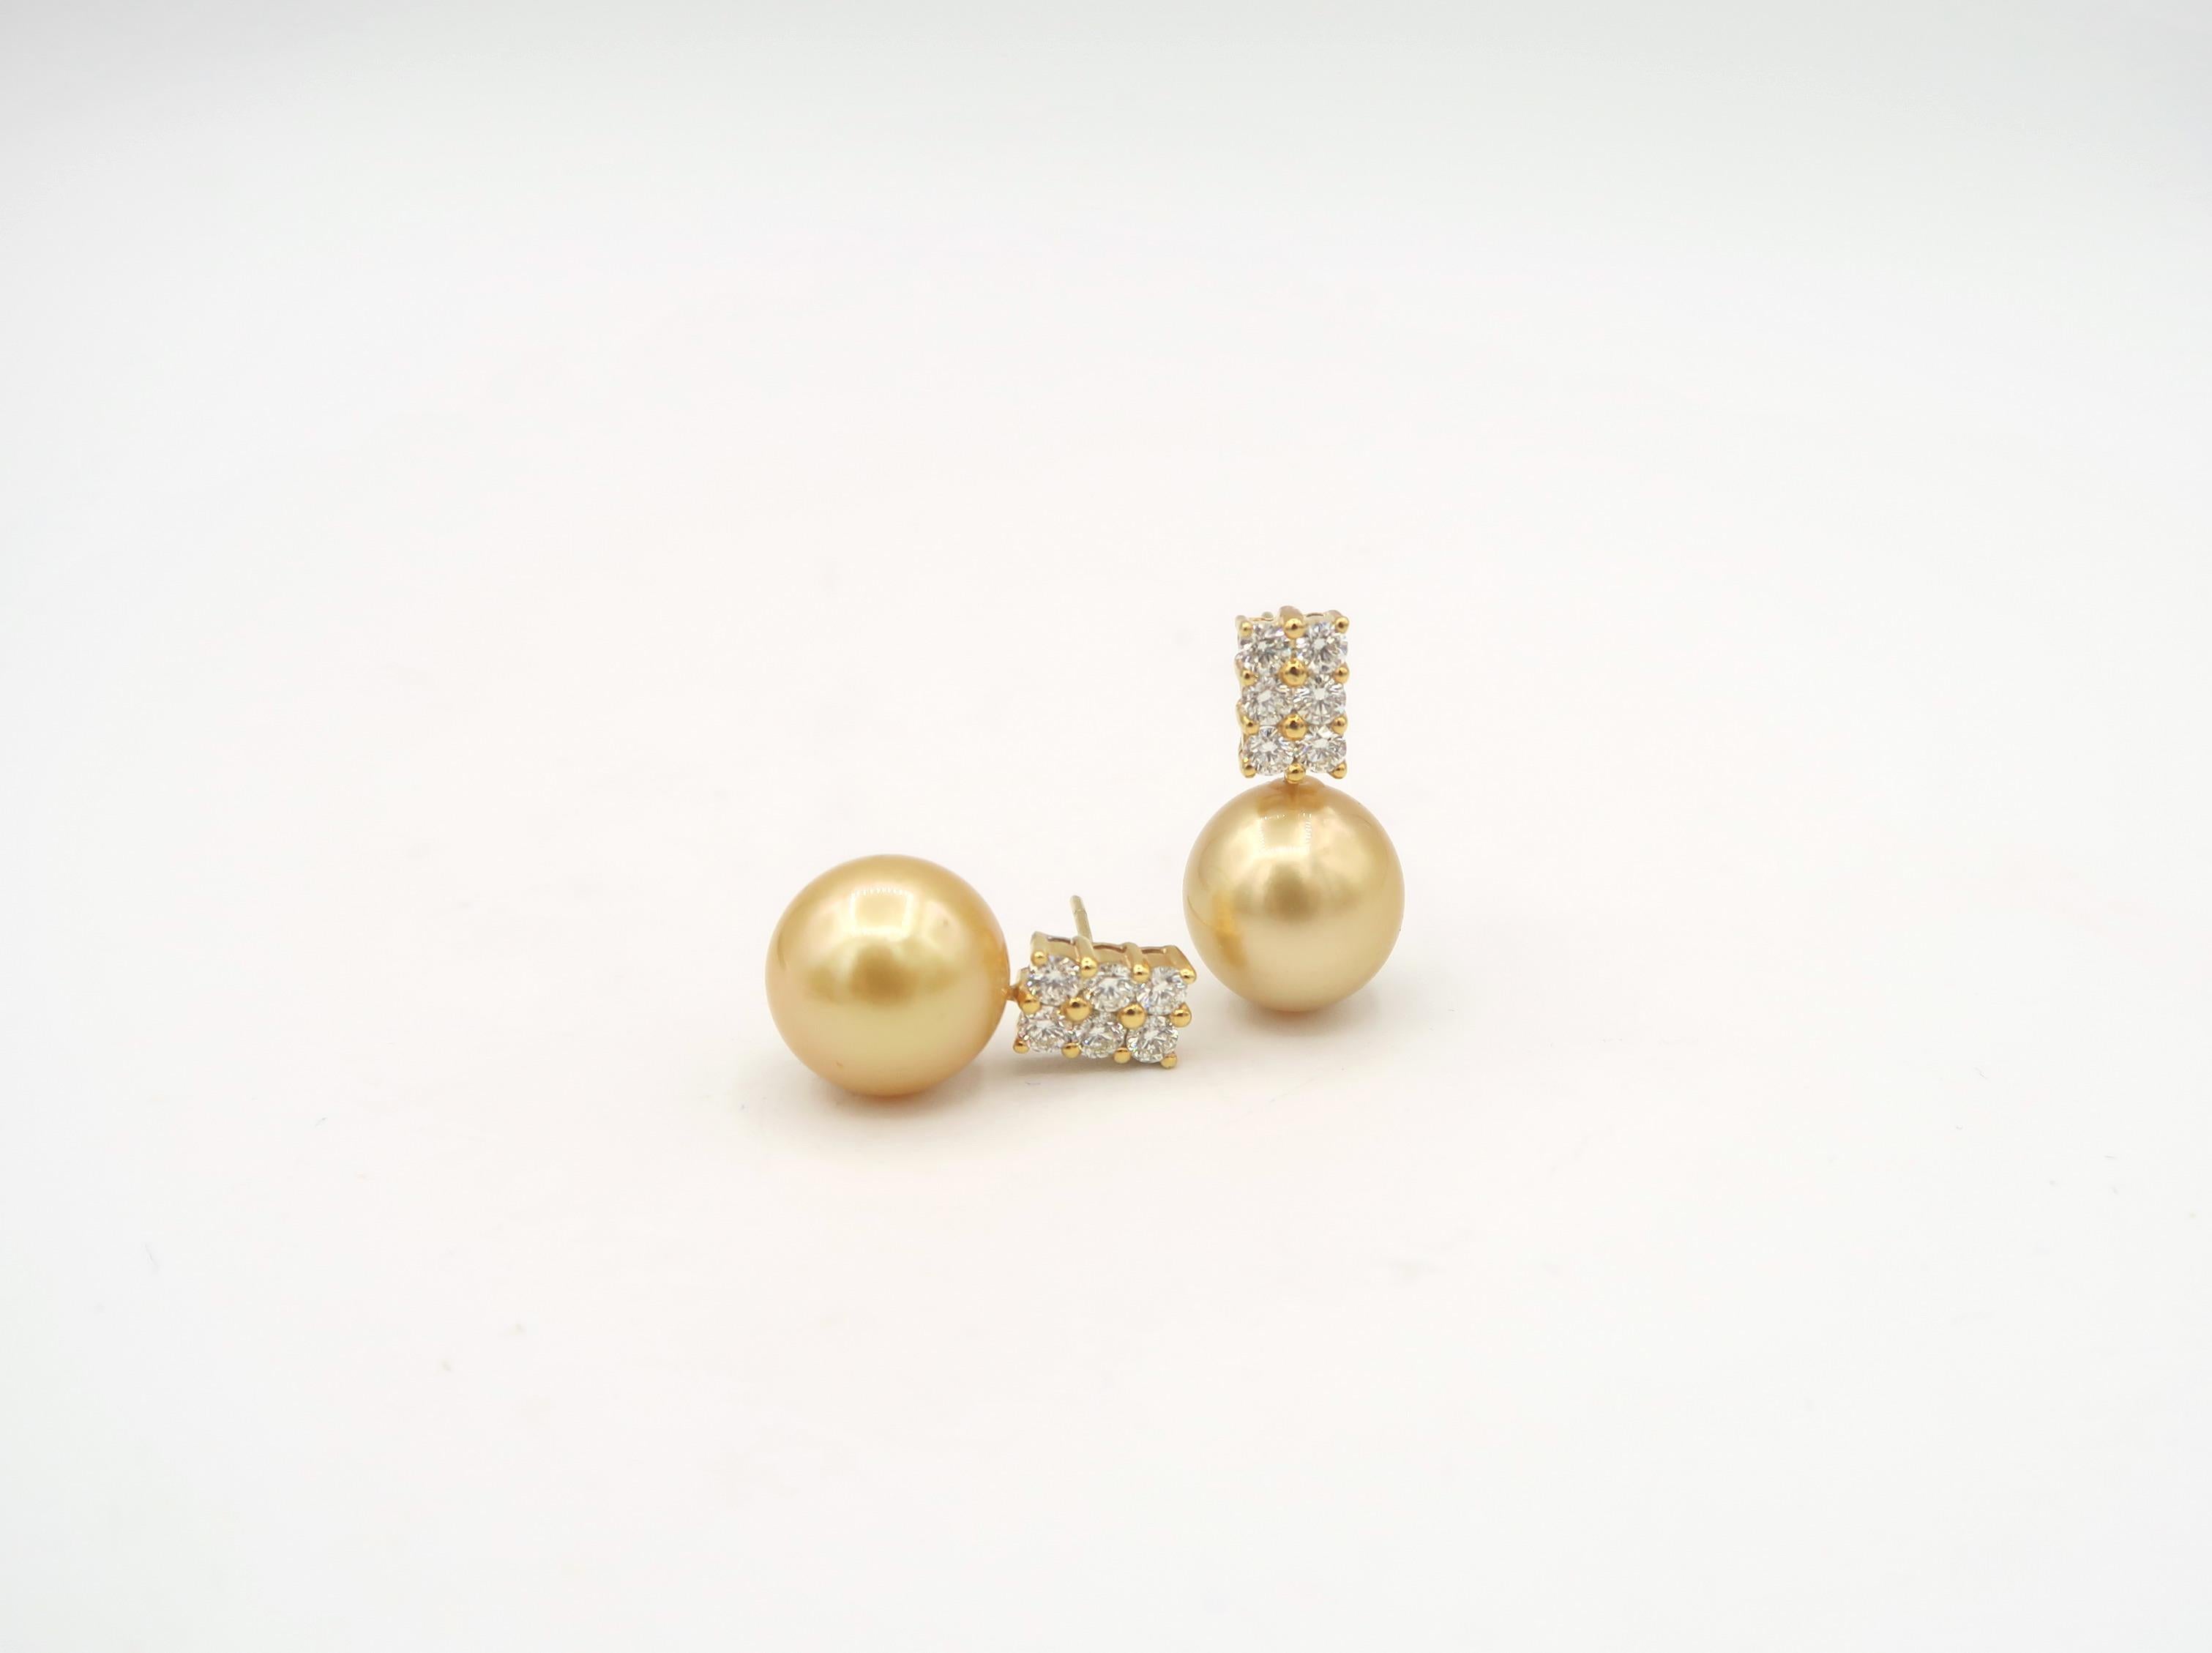 BOON Gold South Sea Pearl with 2 Rows of Diamonds Earrings in 18K Yellow Gold

Diamond: 0.9ct.
Pearl: Gold South Sea Pearls 2 pcs.
Gold: 5.76g.